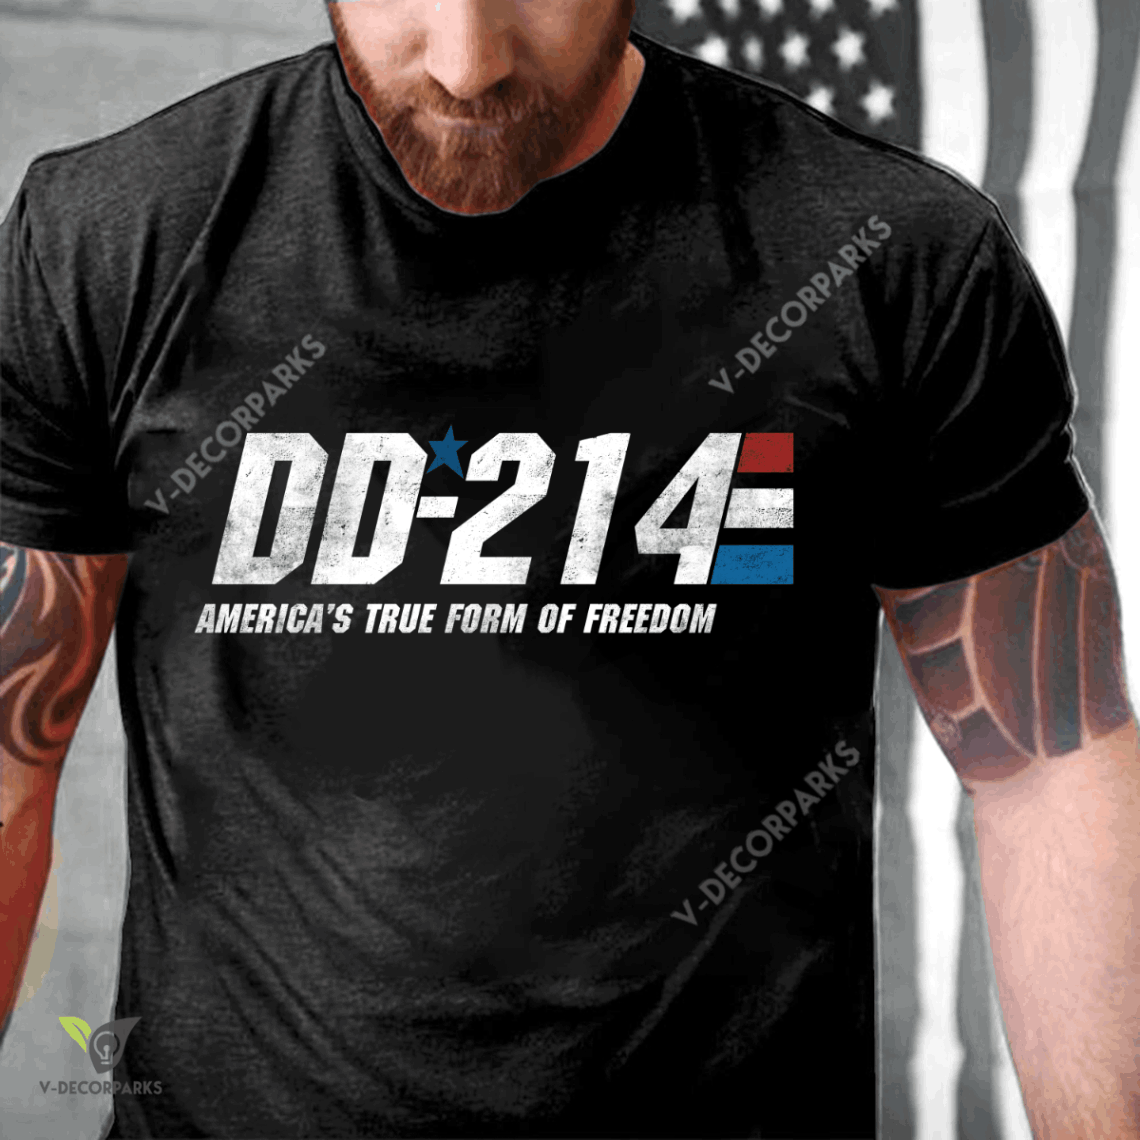 Dd-214 Americas True Form Of Freedom Unisex T-shirt Hoodie All Color Plus Size Up To S-5xl